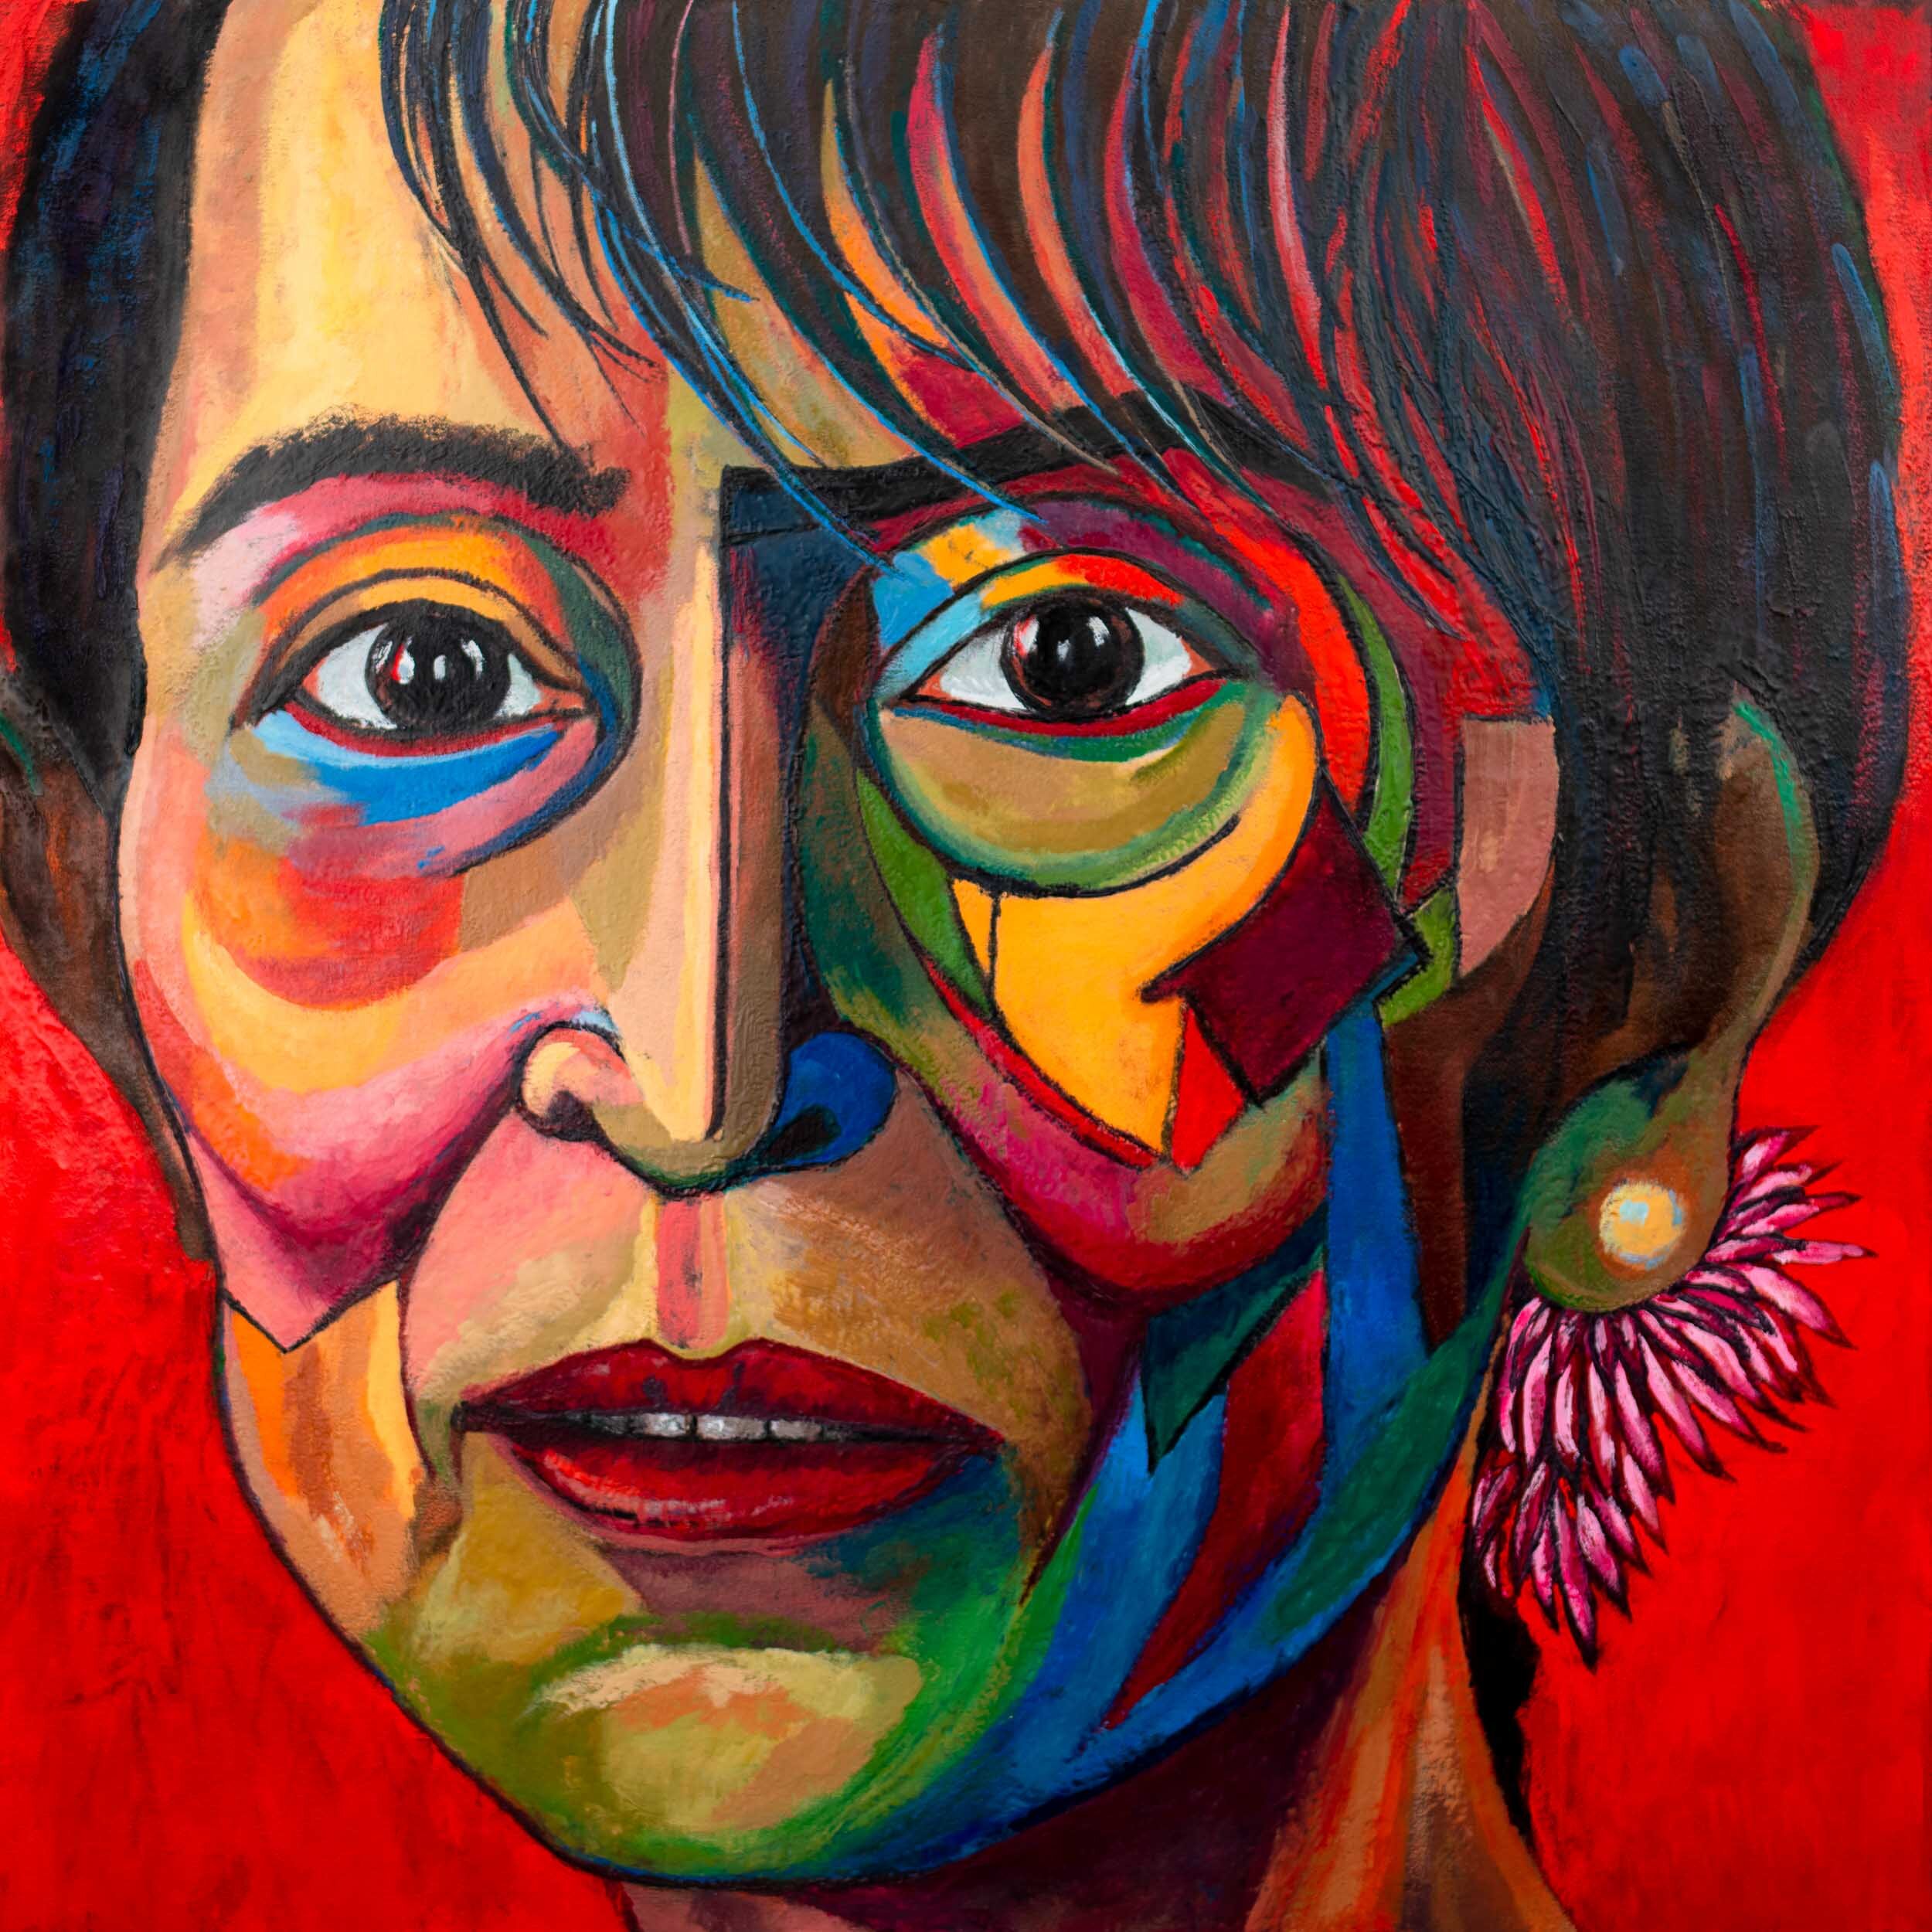 Fall From Grace — Impression of Aung San Suu Kyi